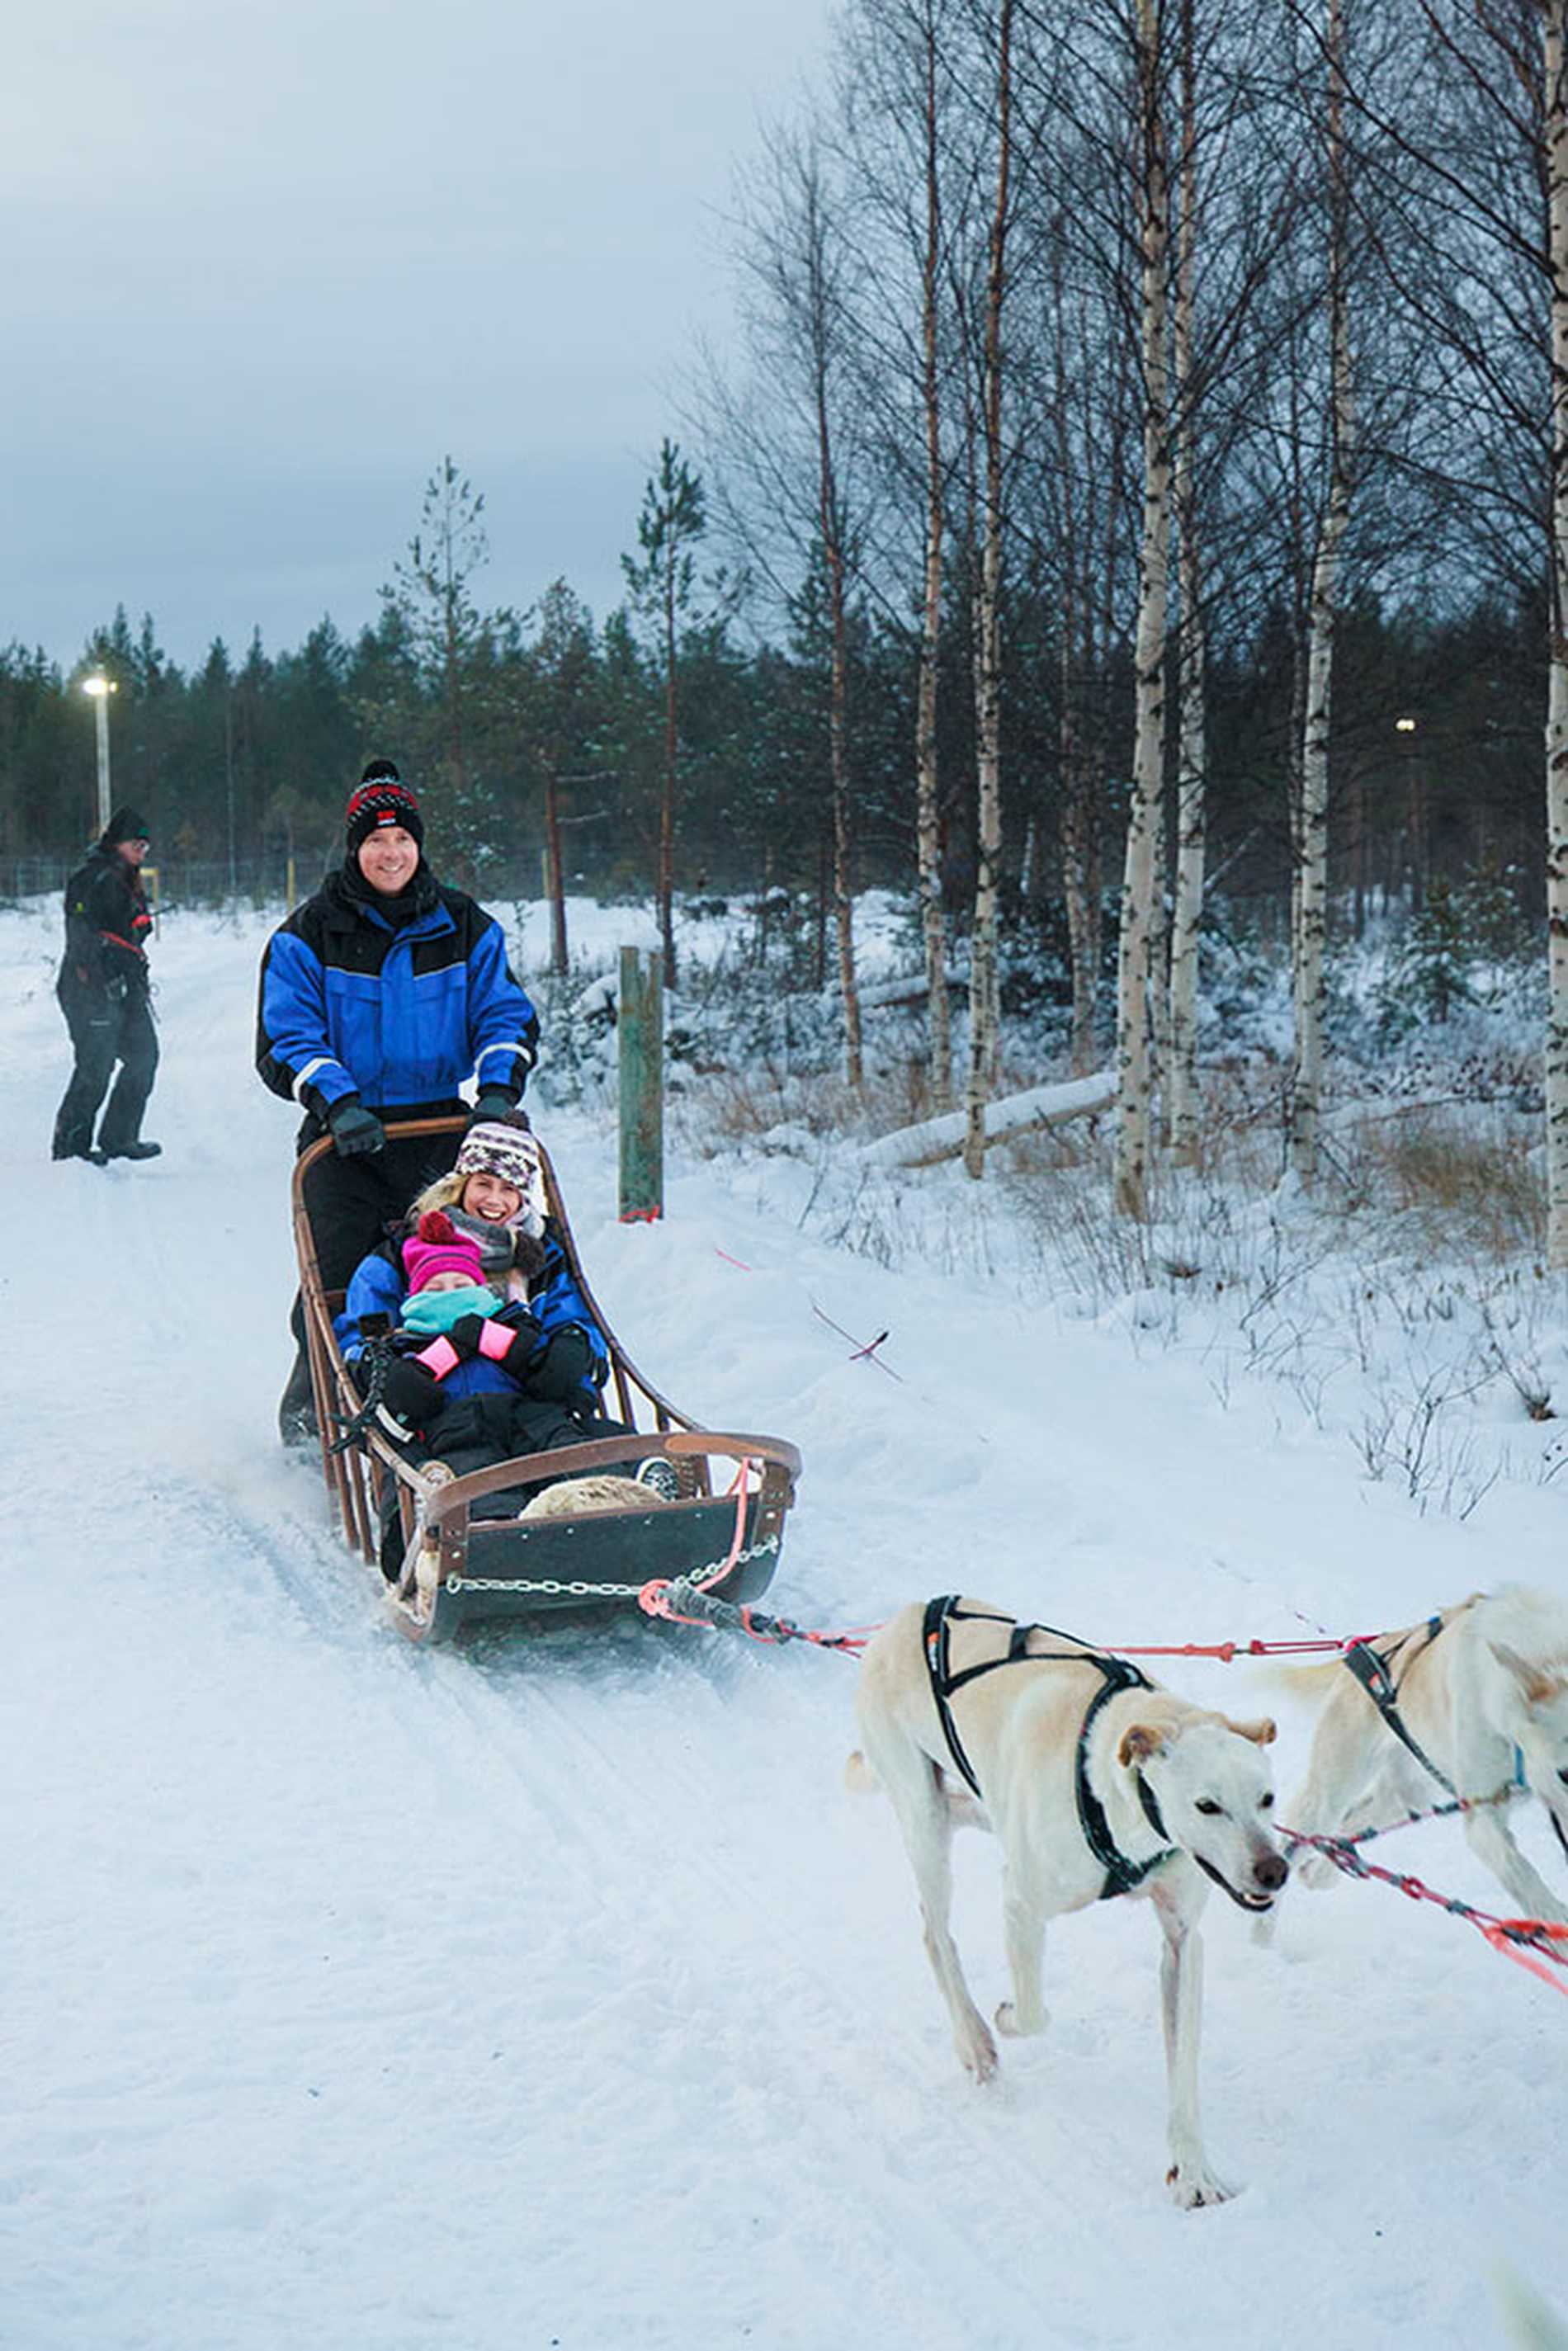 Alice and her mum enjoying a dog sled ride as dad pilots the sled.